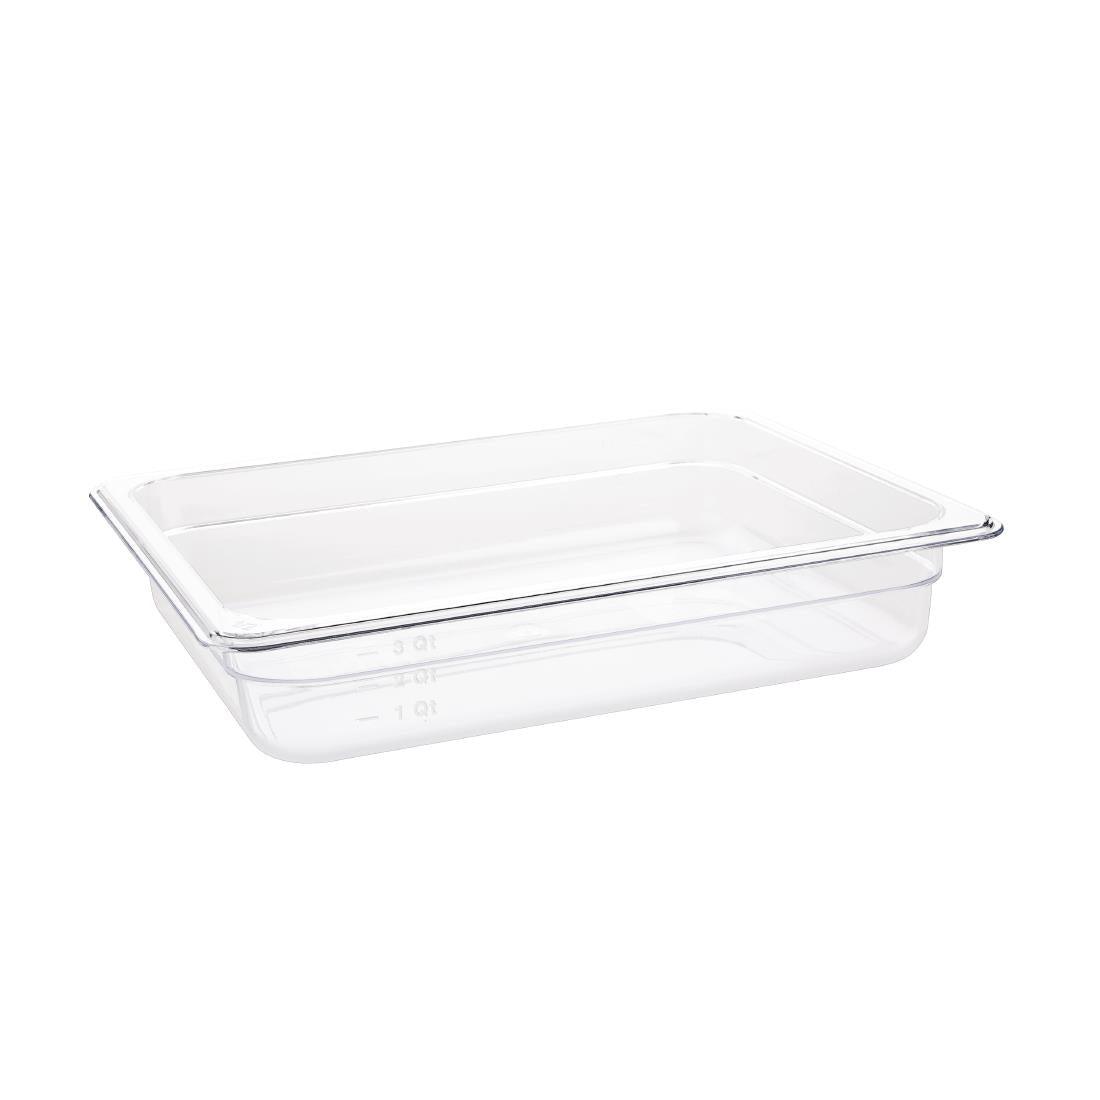 Vogue Clear Polycarbonate 1/2 Gastronorm Tray 65mm - HospoStore